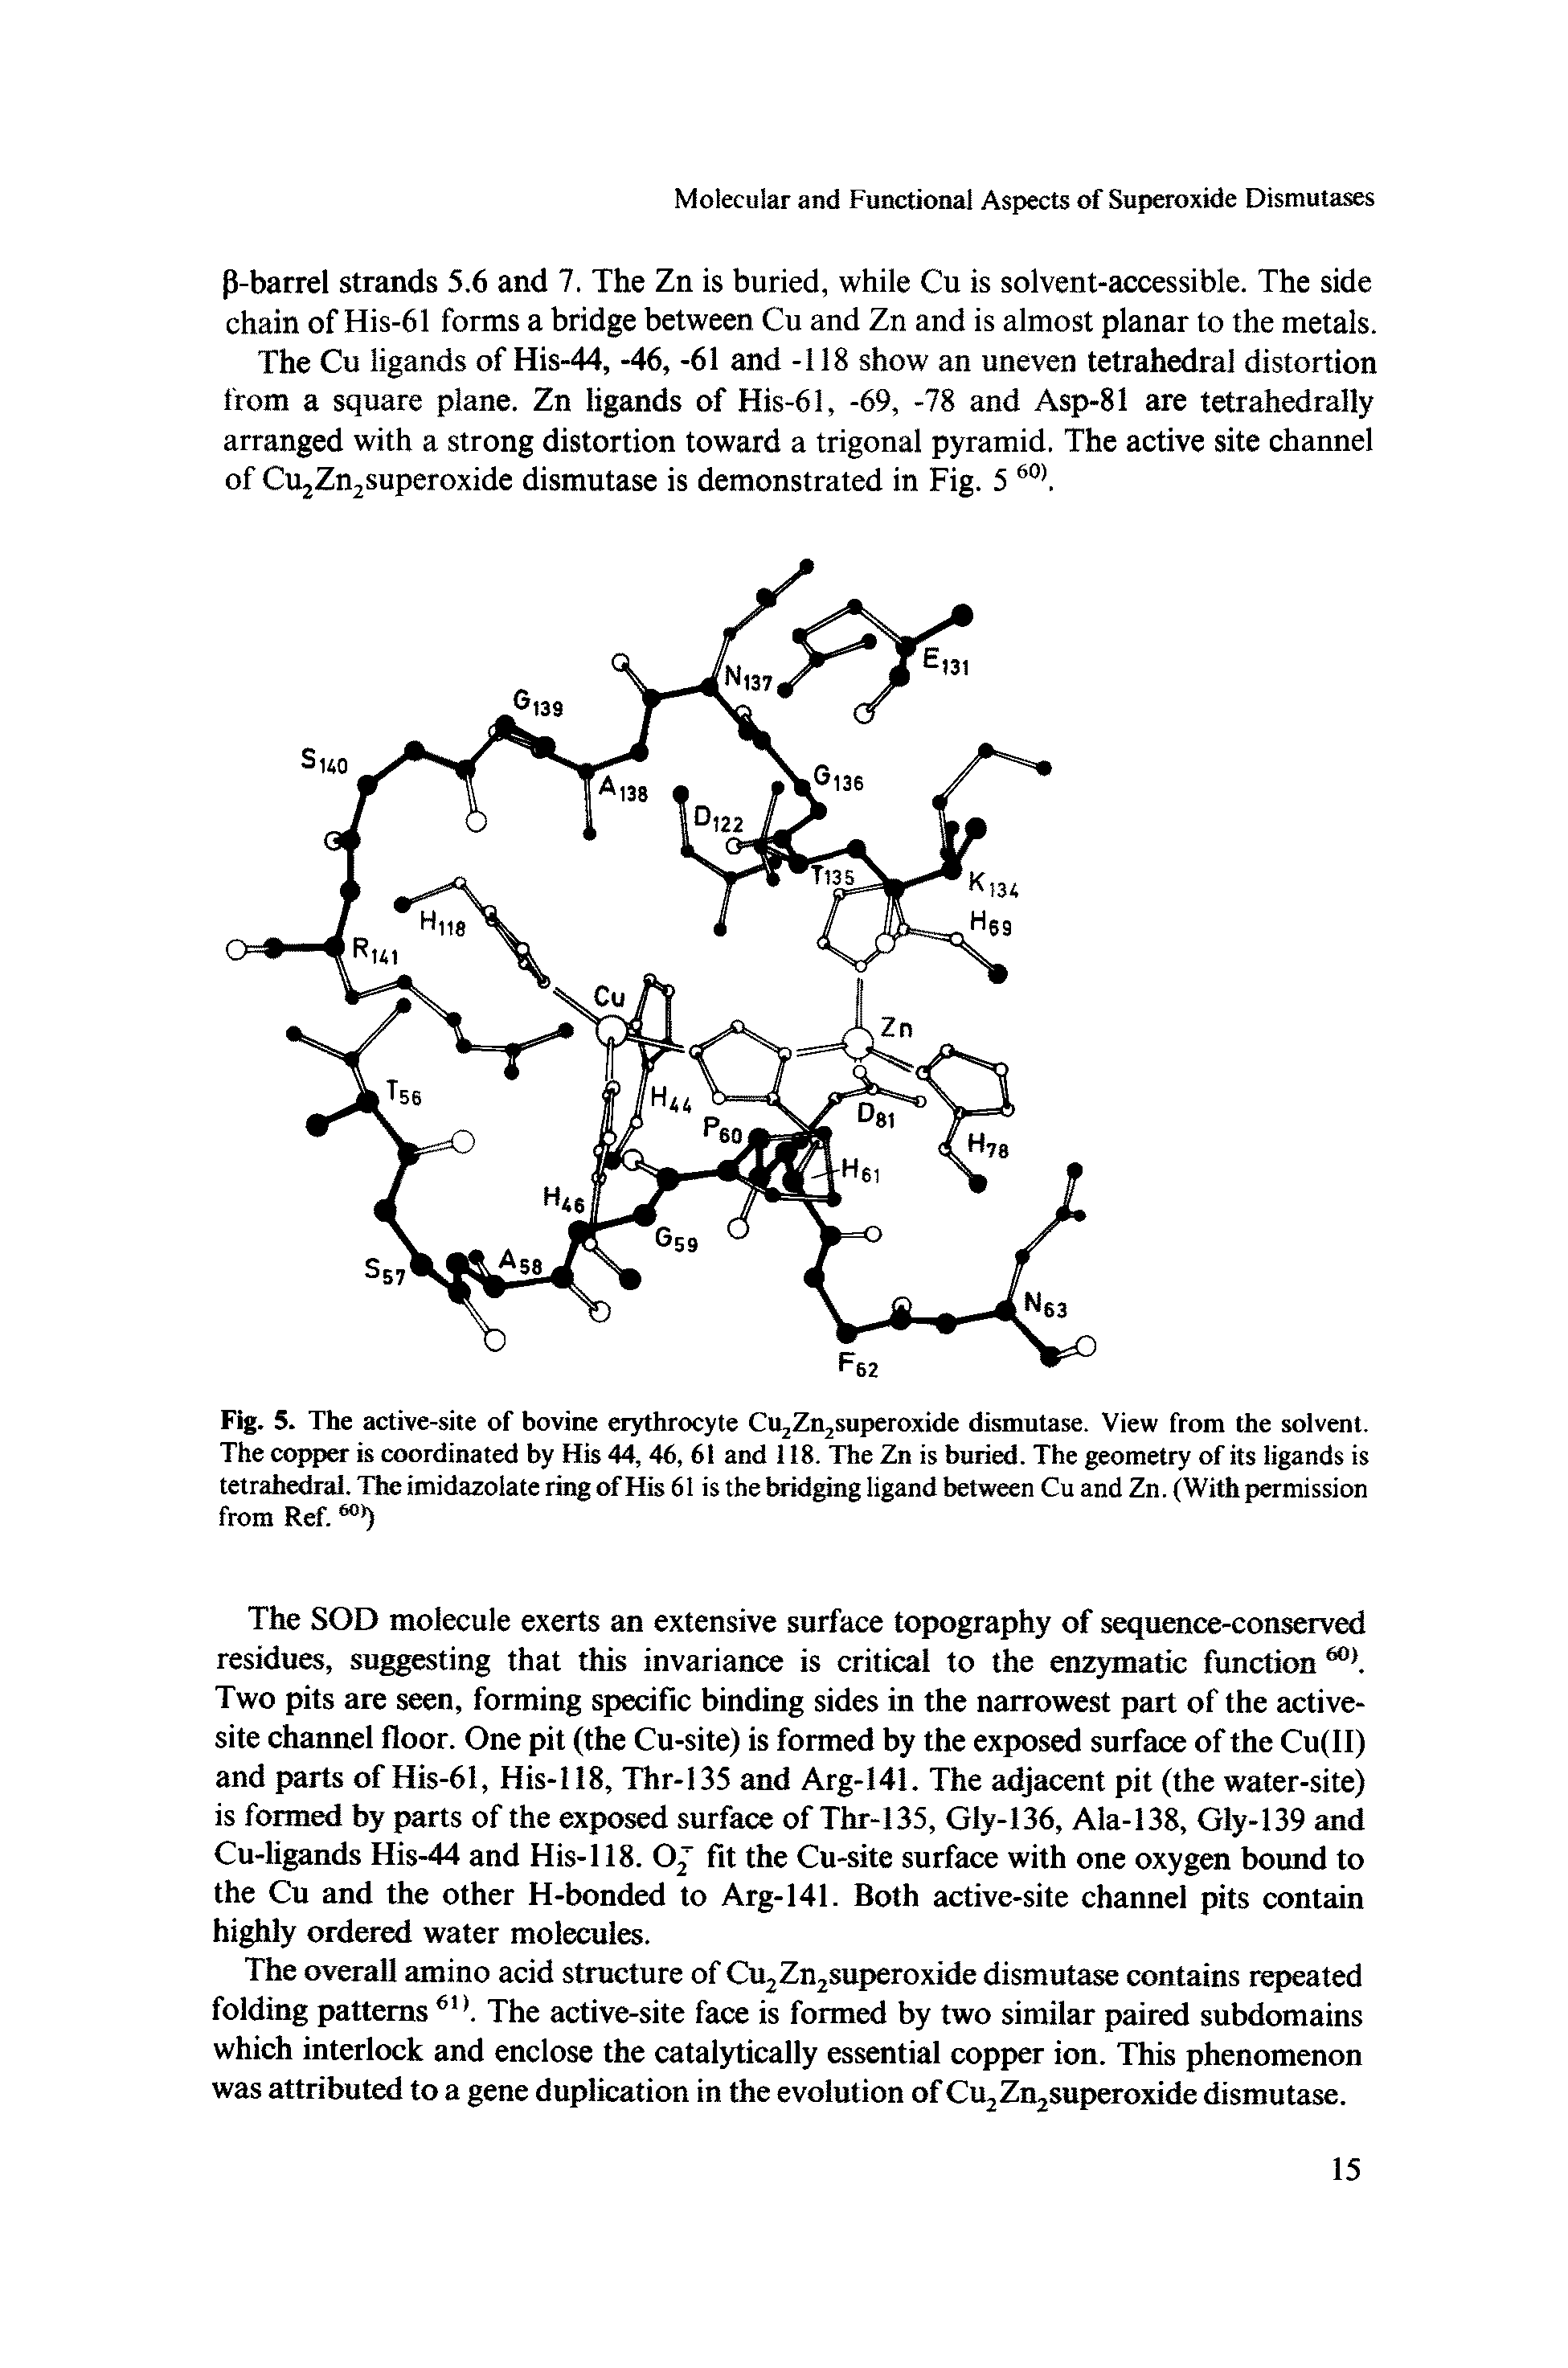 Fig. 5. The active-site of bovine erythrocyte Cu Zn superoxide dismutase. View from the solvent. The copper is coordinated by His 44,46,61 and 118. The Zn is buried. The geometry of its ligands is tetrahedral. The imidazolate ring of His 61 is the brid ng ligand between Cu and Zn. (With permission from Ref. )...